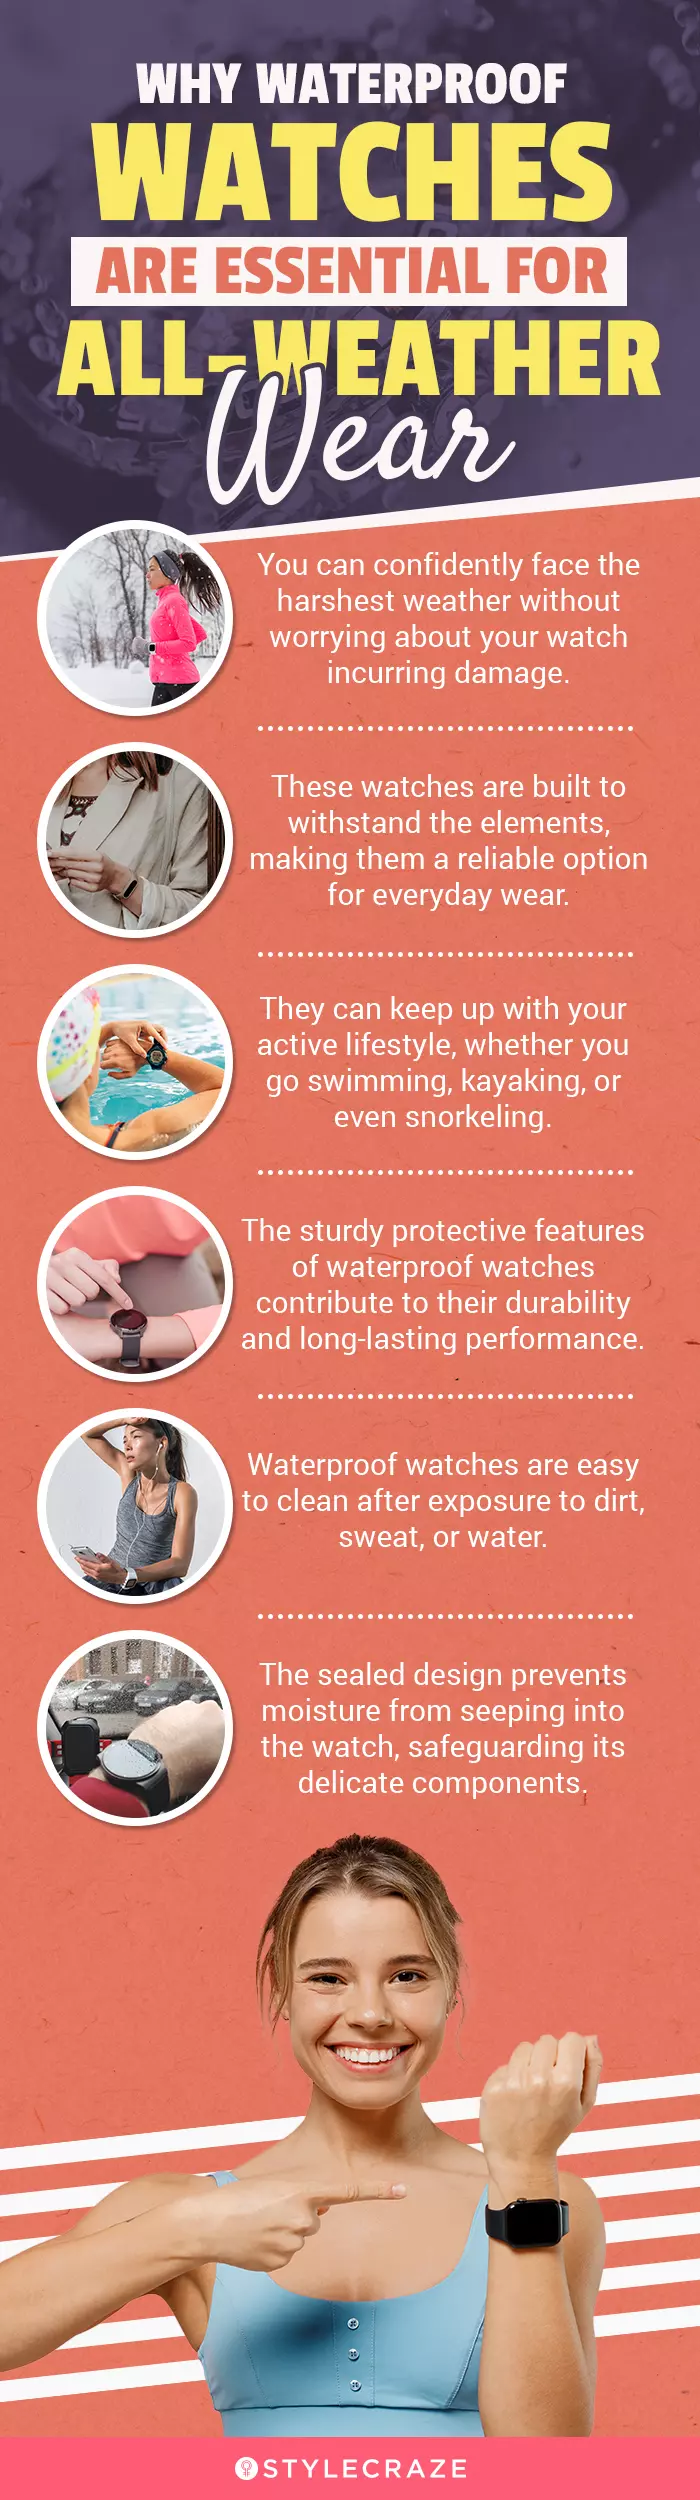 Why Waterproof Watches Are Essential For All-Weather Wear (infographic)